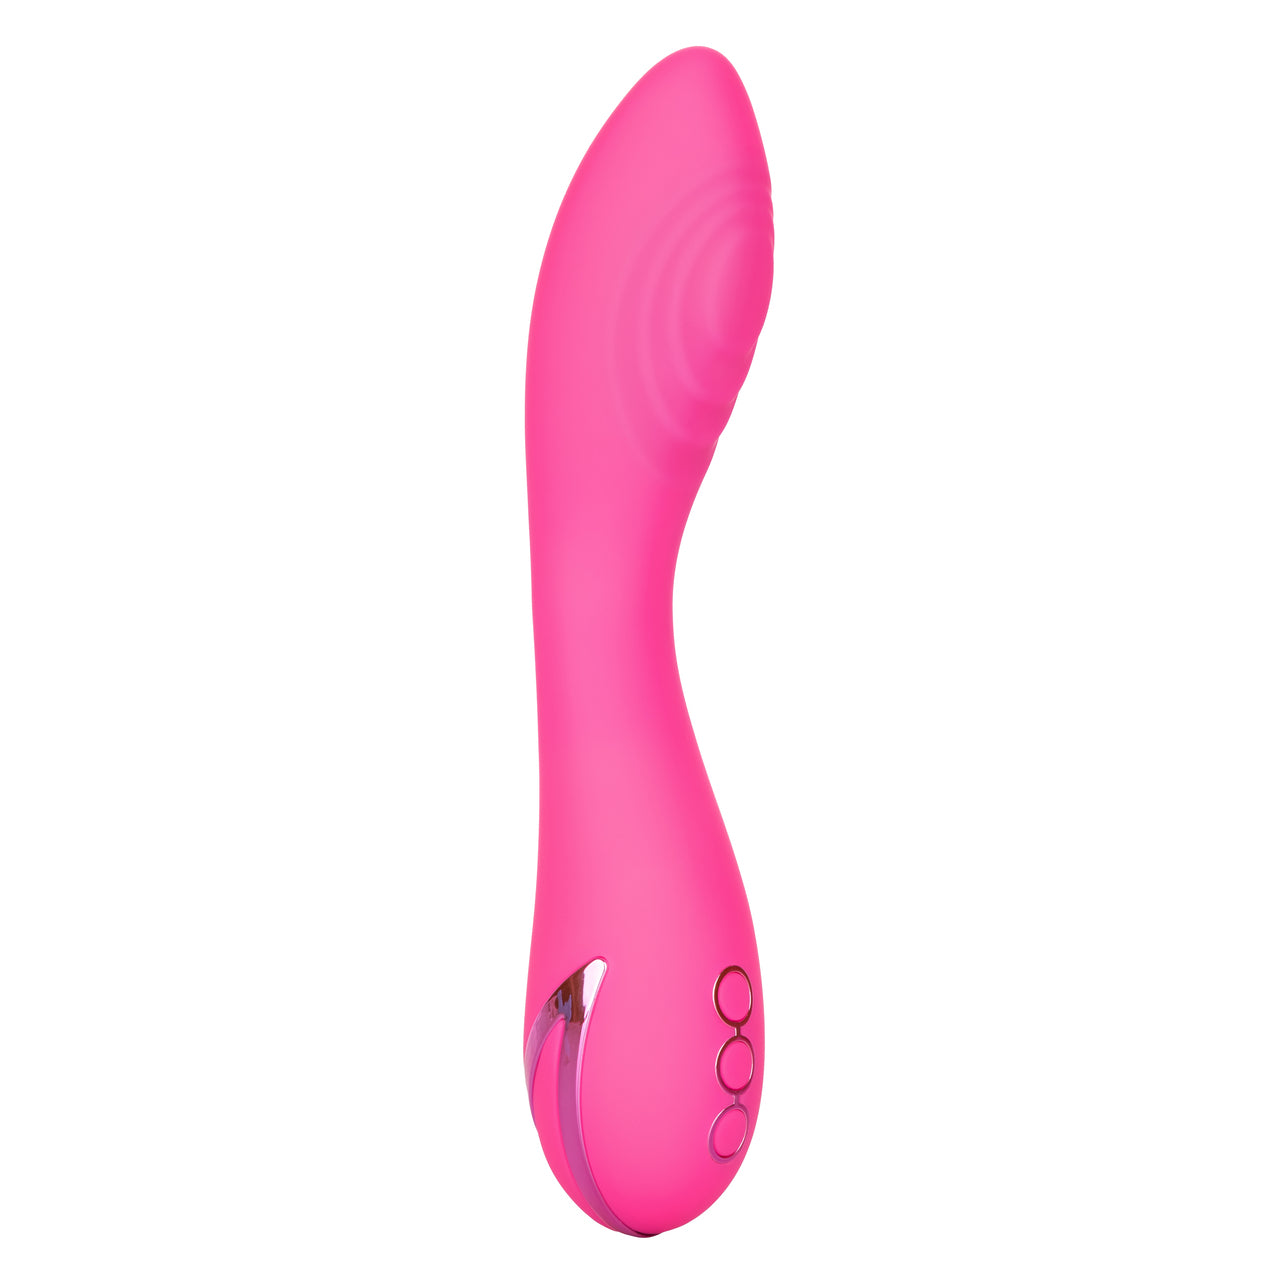 California Dreaming Surf City Centerfold Vibrator - Thorn & Feather